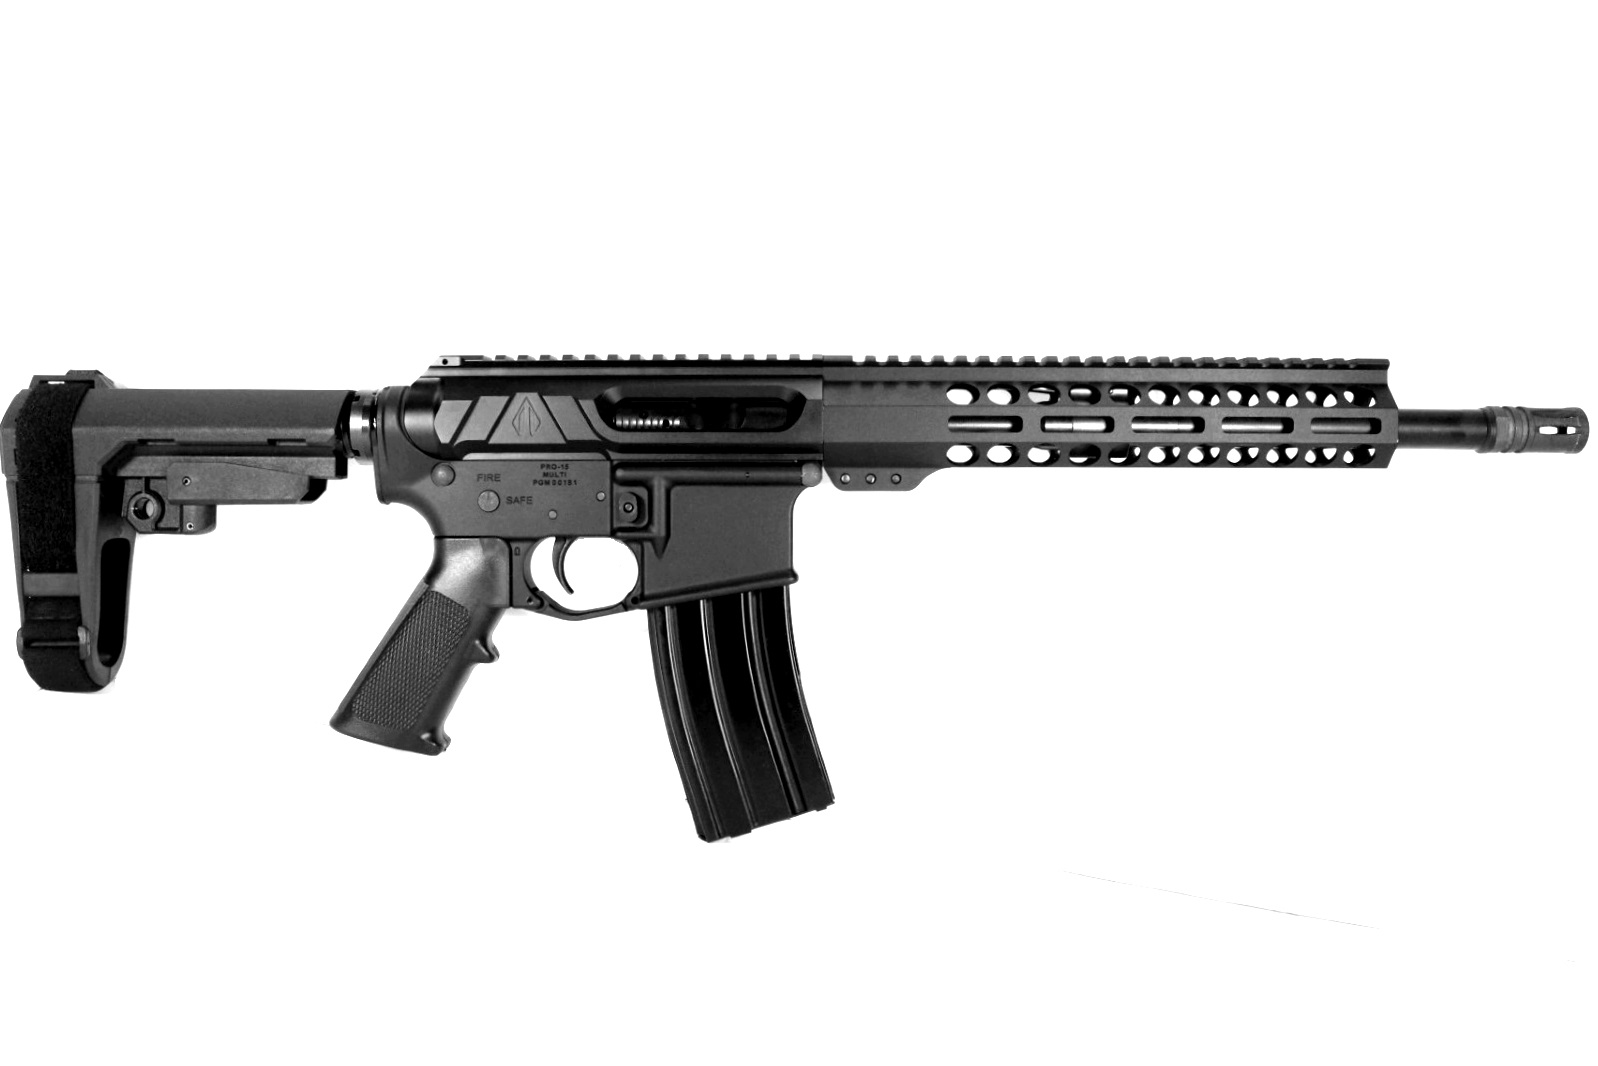 12.5 inch 300 Blackout Side Charging AR15 Pistol | Pro2a Tactical